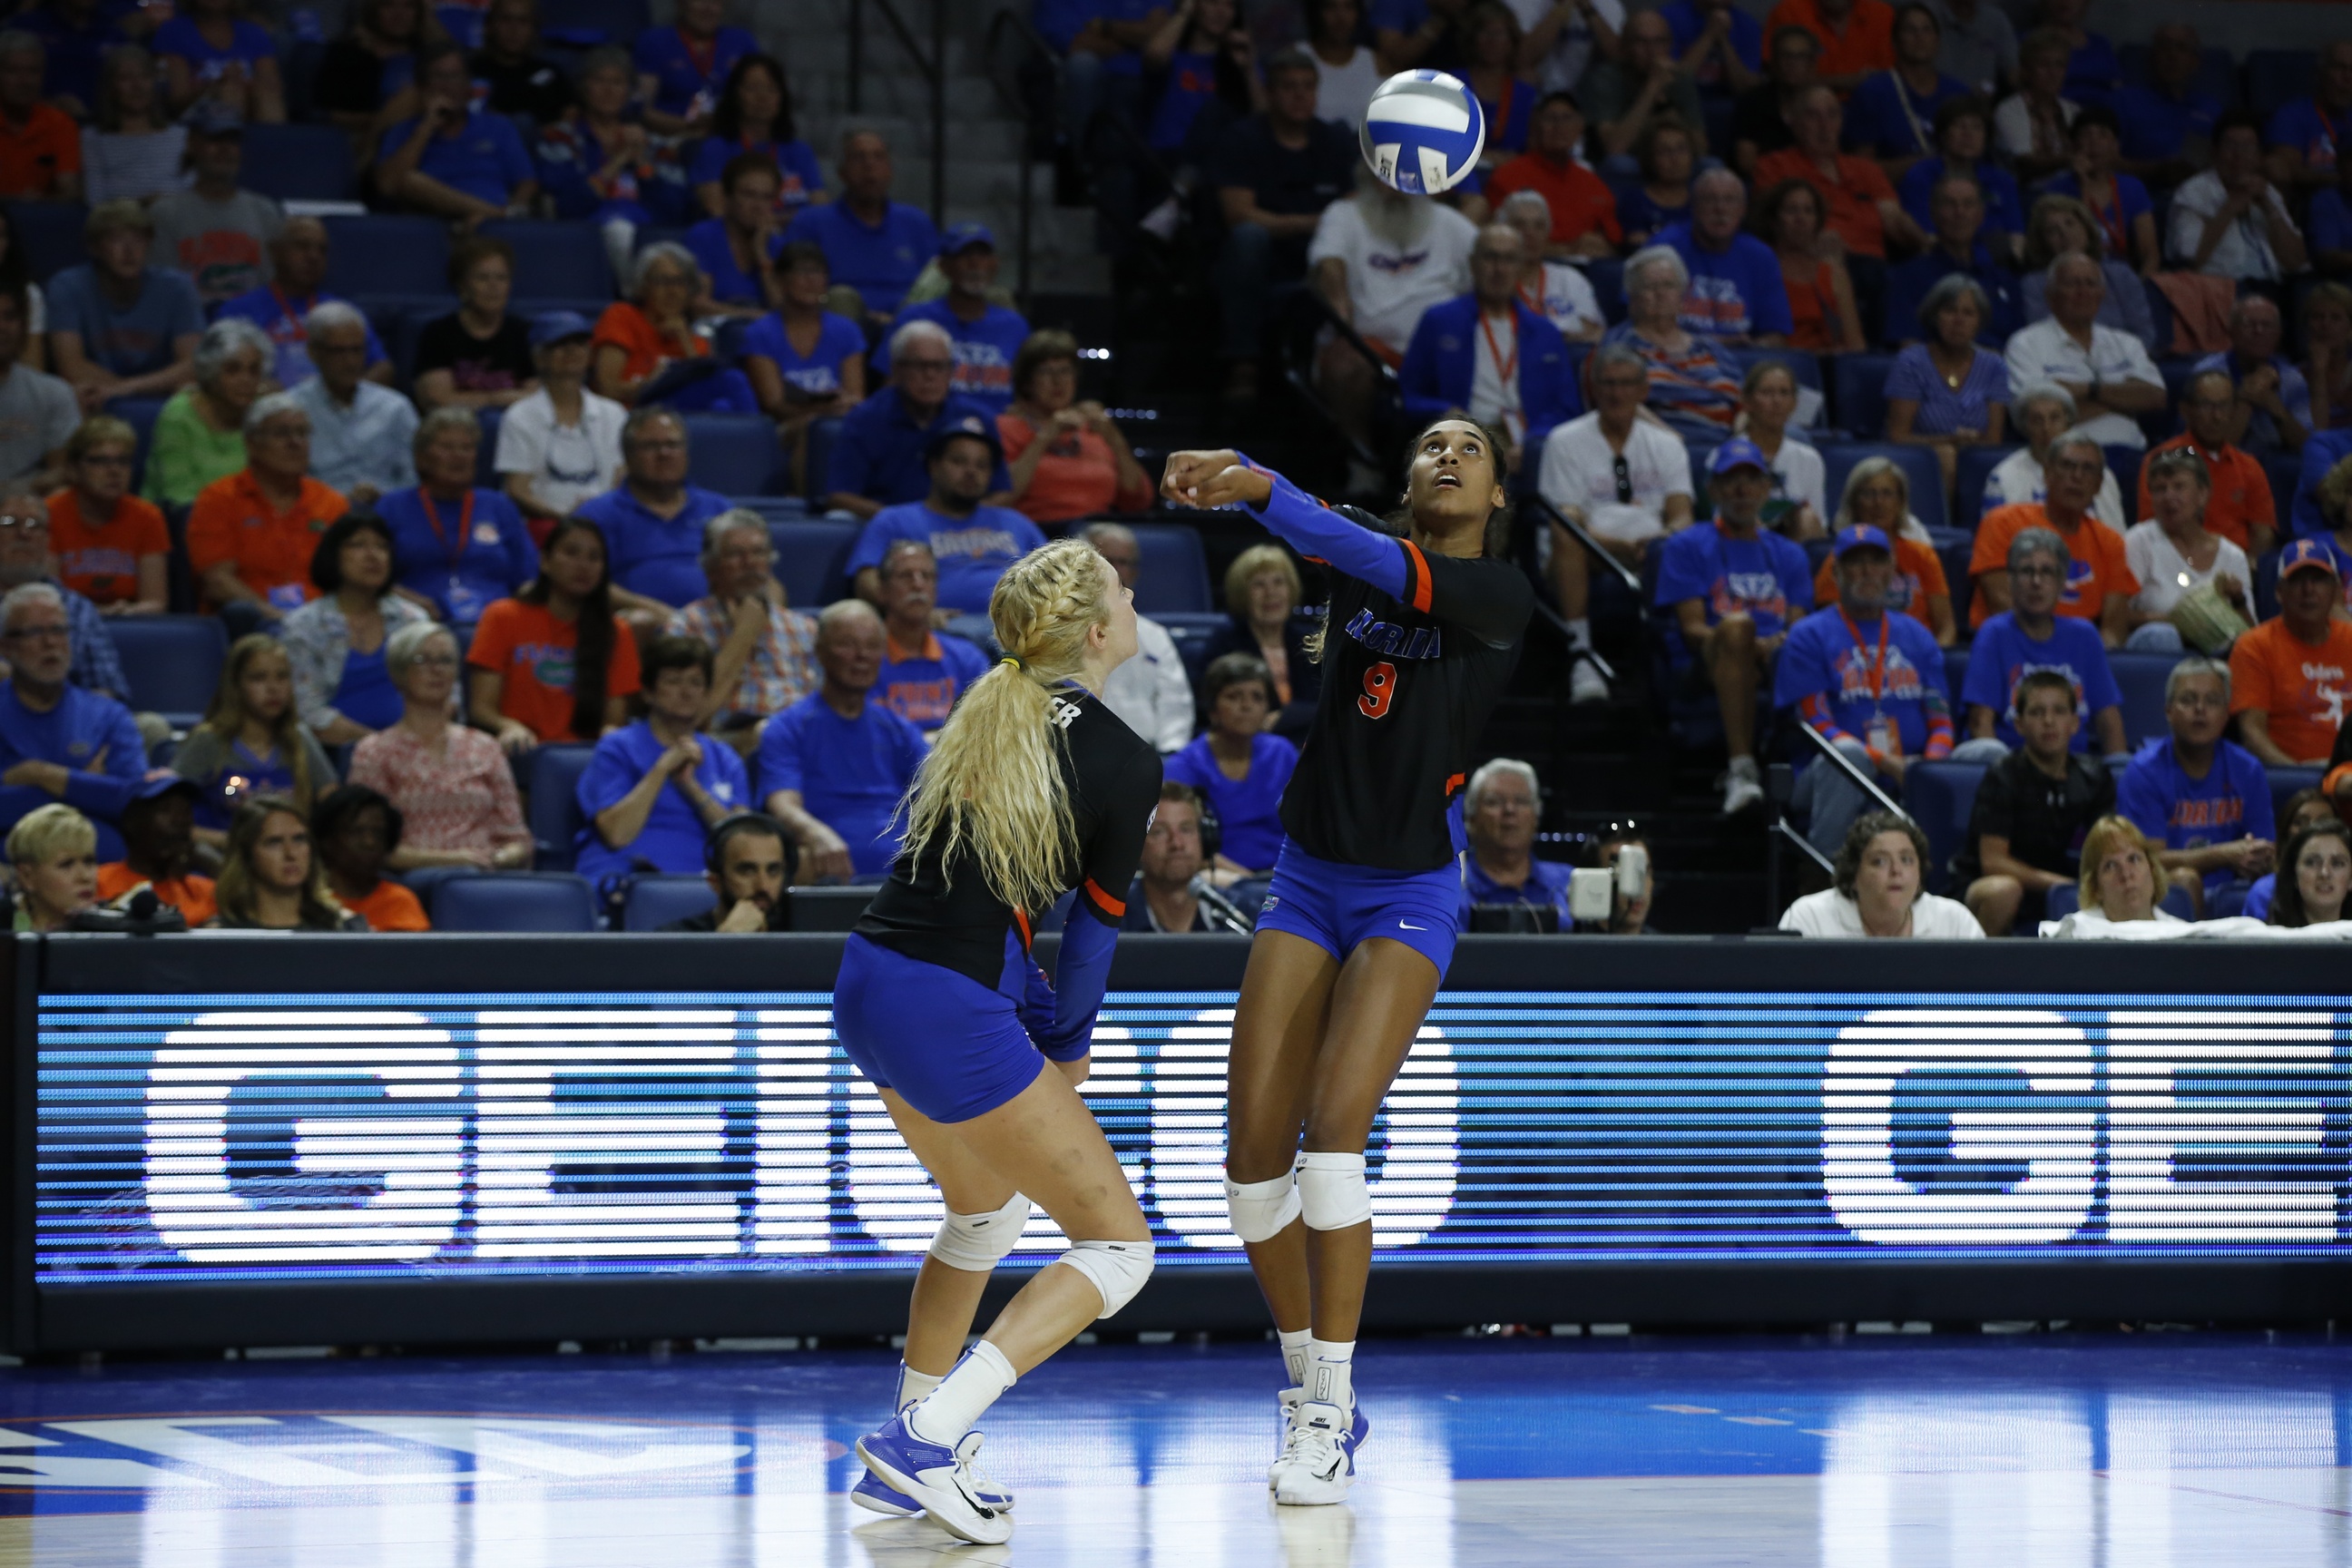 Gator Volleyball Looks to Stay Hot Against Aggies - ESPN 98.1 FM - 850 AM WRUF